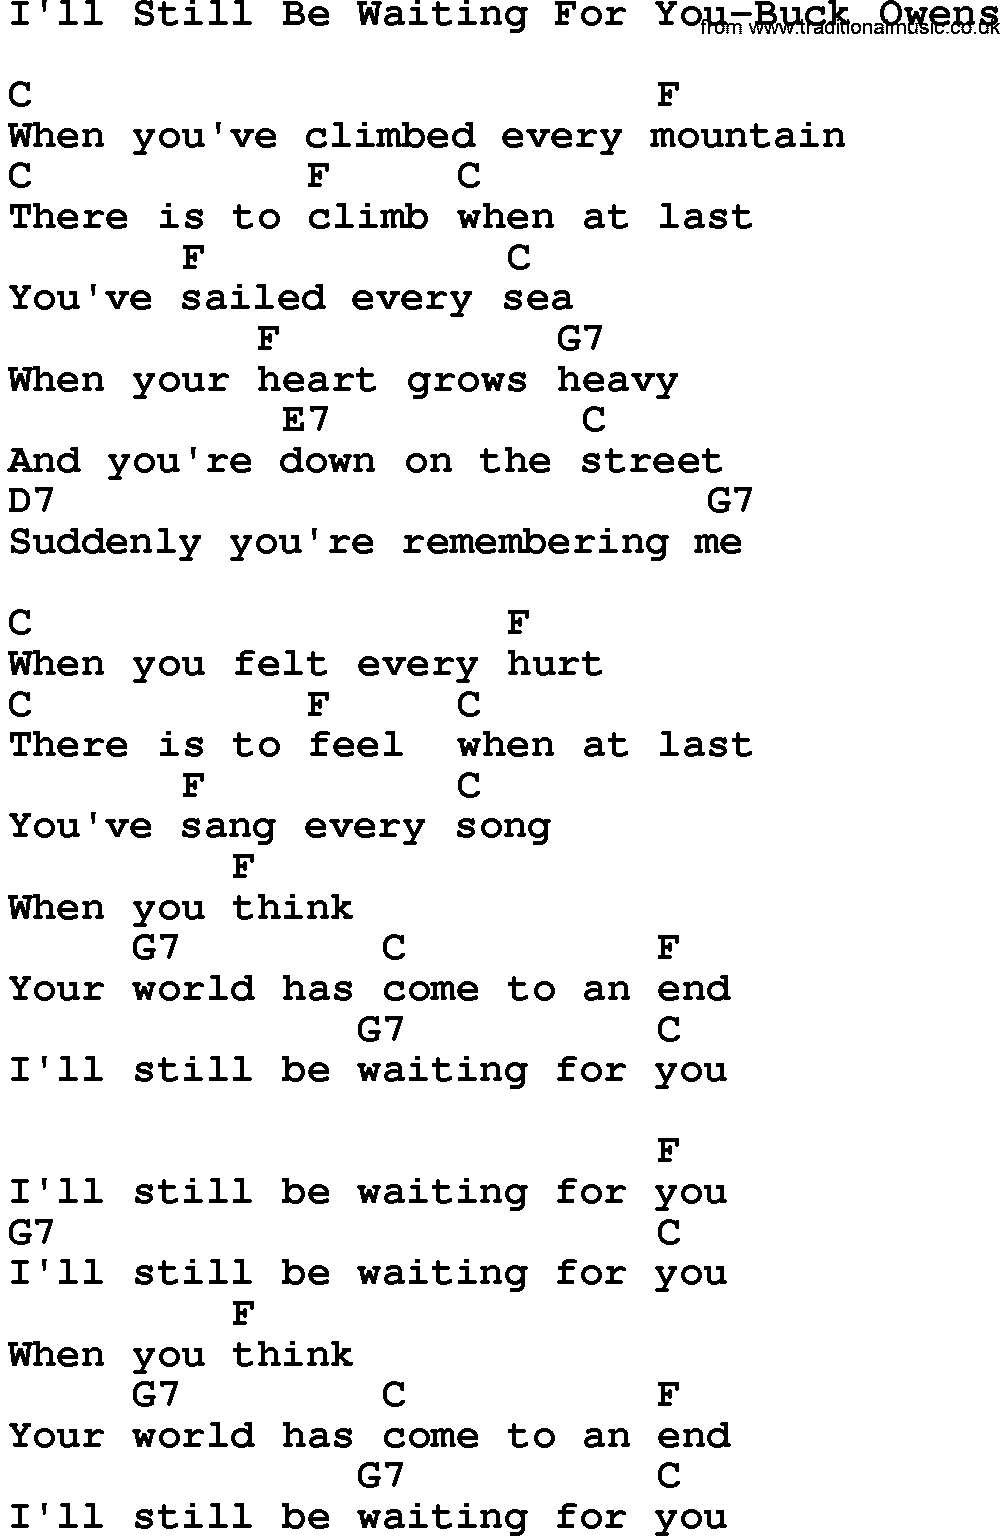 Country music song: I'll Still Be Waiting For You-Buck Owens lyrics and chords